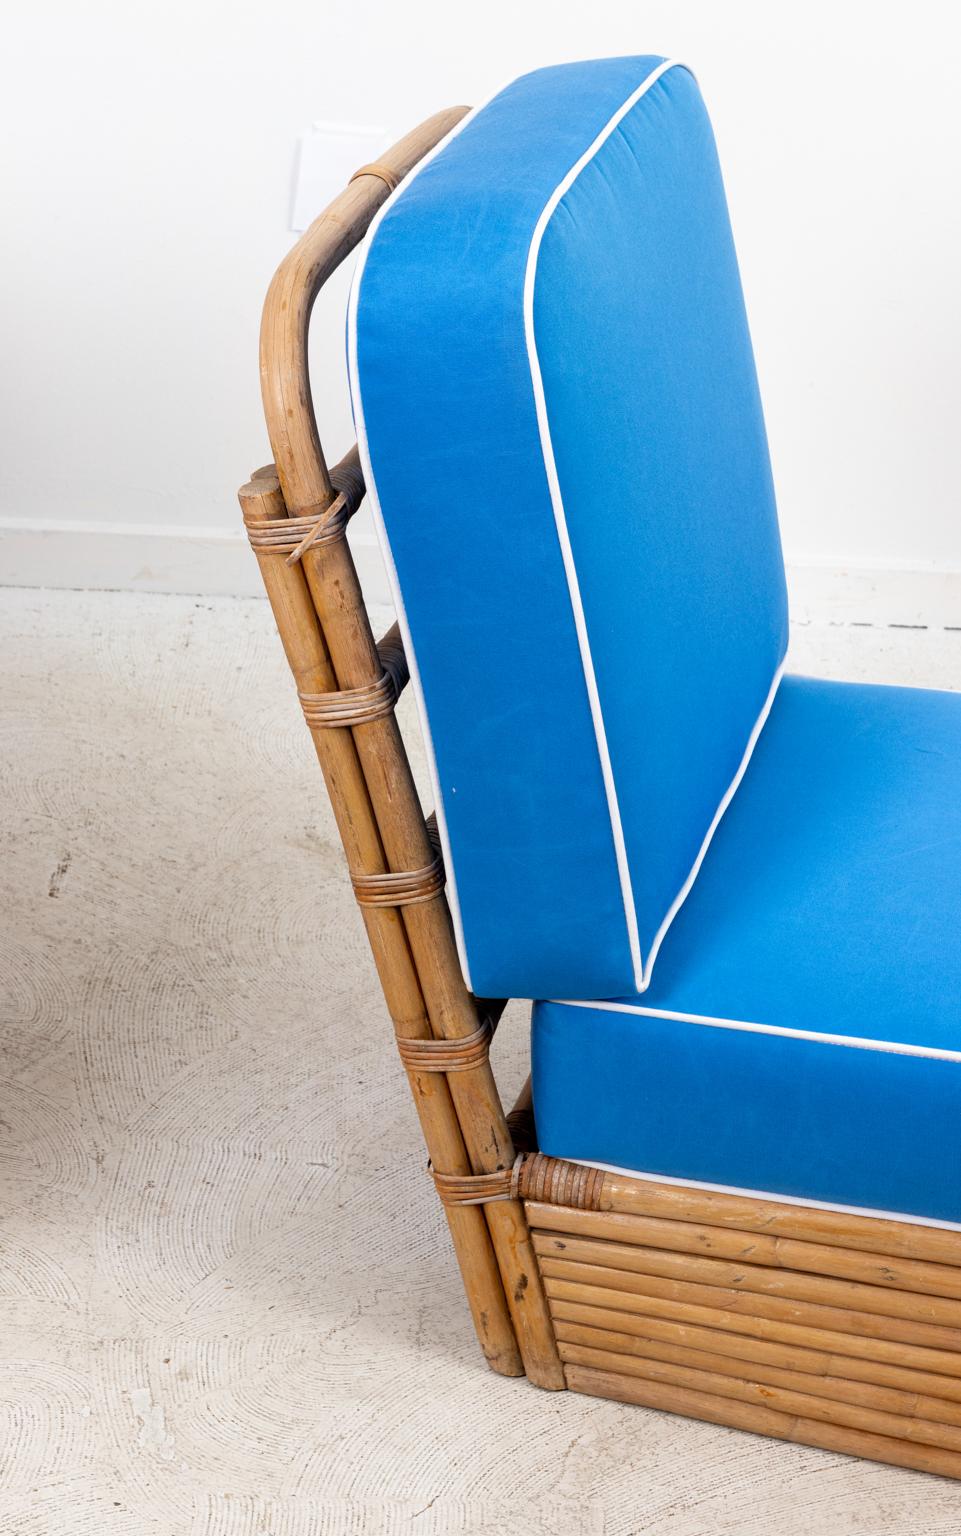 Set of six Mid-Century Modern style rattan chairs, newly upholstered in blue with cord trim. Please note of wear consistent with age including minor finish loss to the rattan.